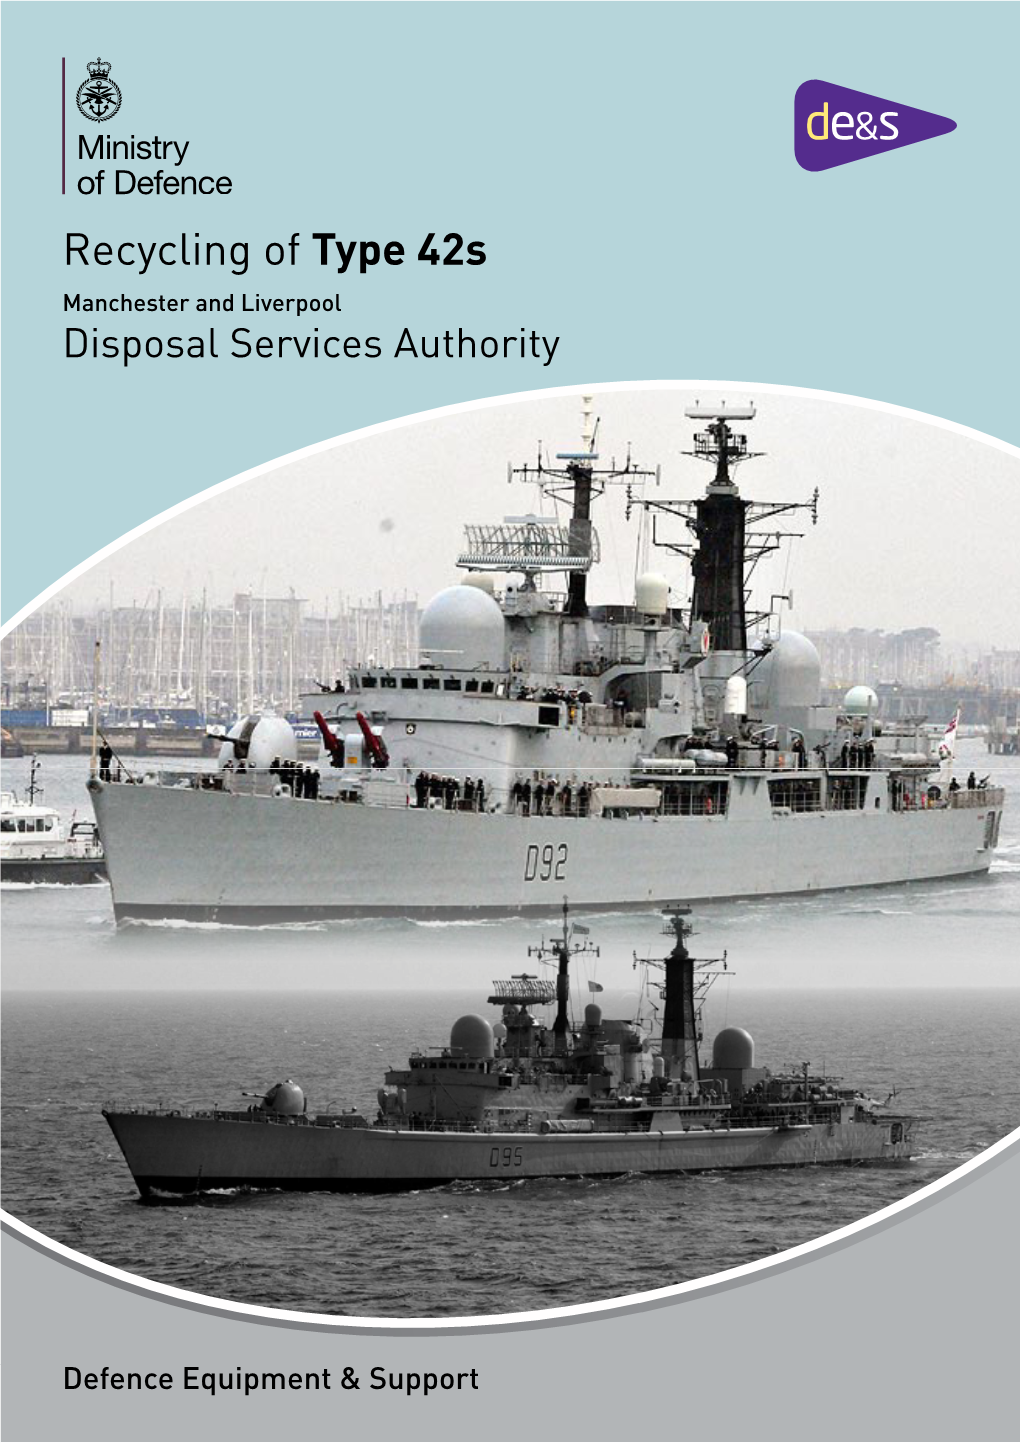 Recycling of Type 42 Destroyers HMS Manchester and HMS Liverpool